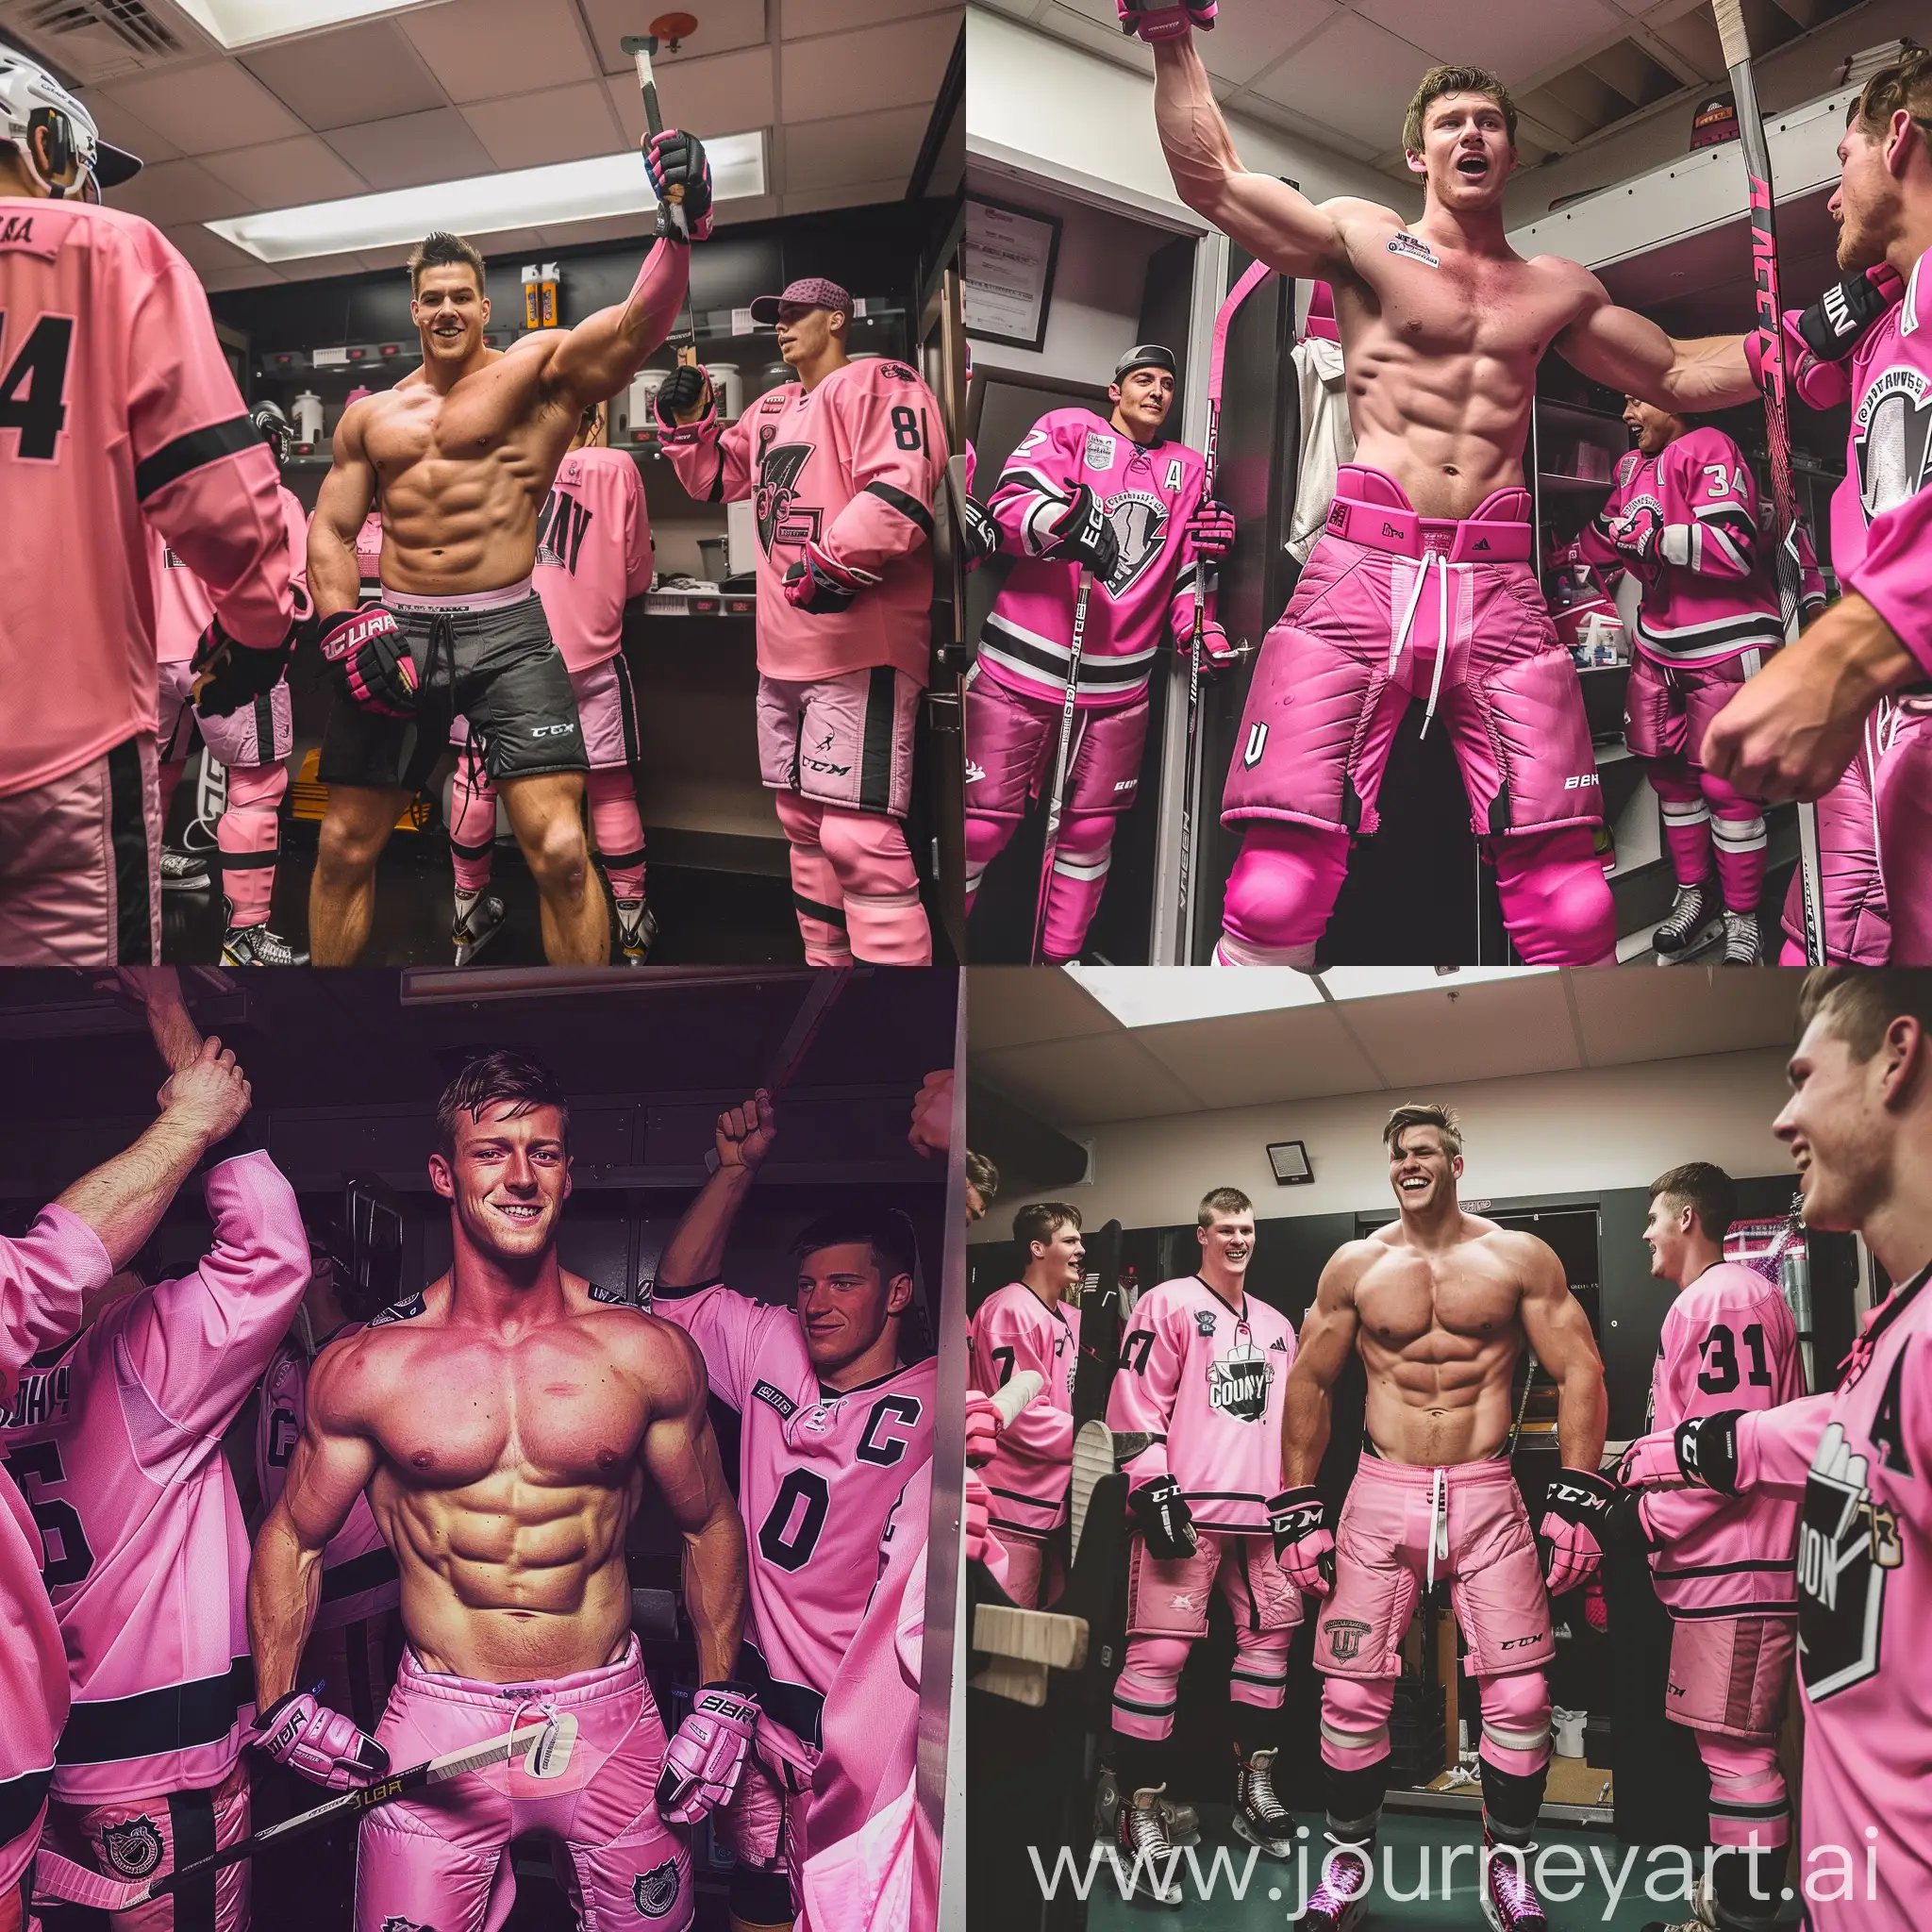 Celebrating-Tournament-Win-Muscular-College-Hockey-Players-in-Pink-Uniforms